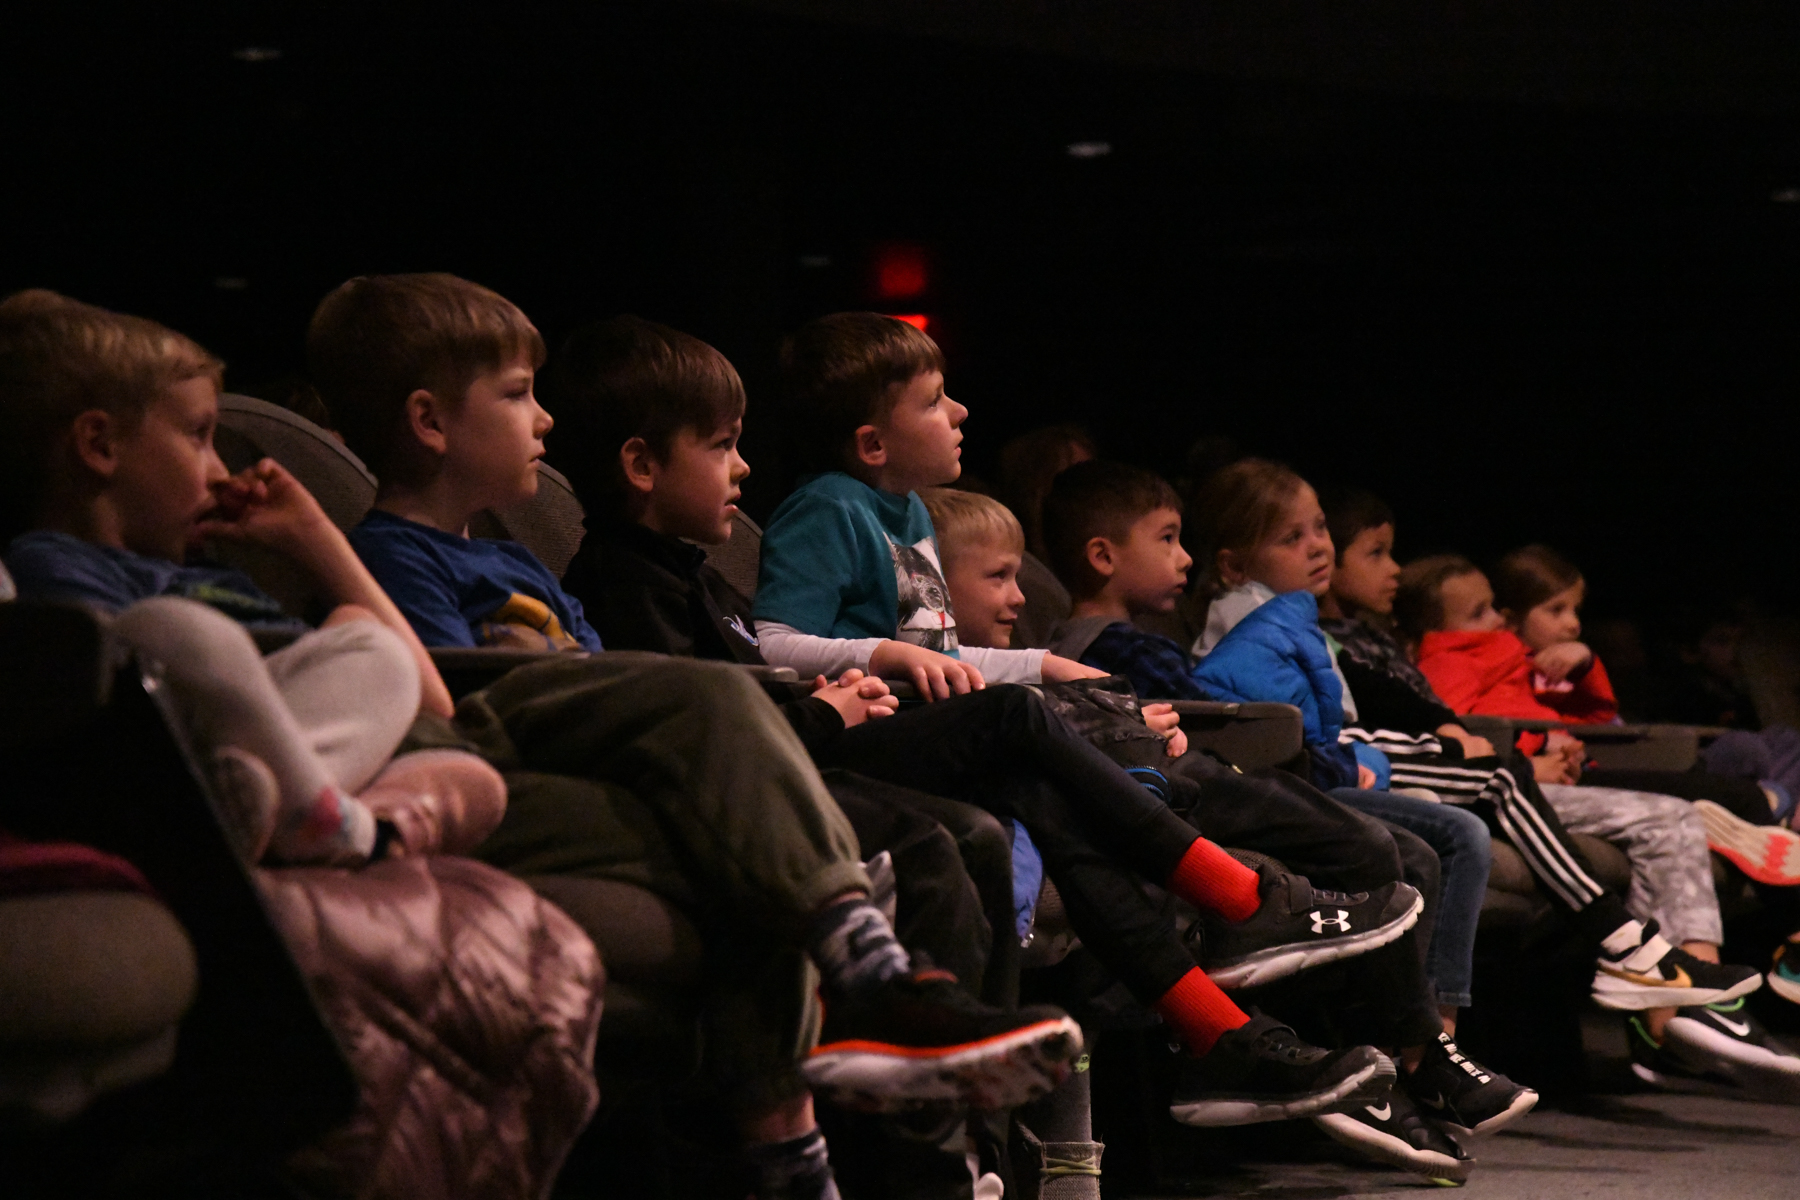 The attendees were enthralled by the performances at the Dr. Seuss Day event presented at Peru State College.